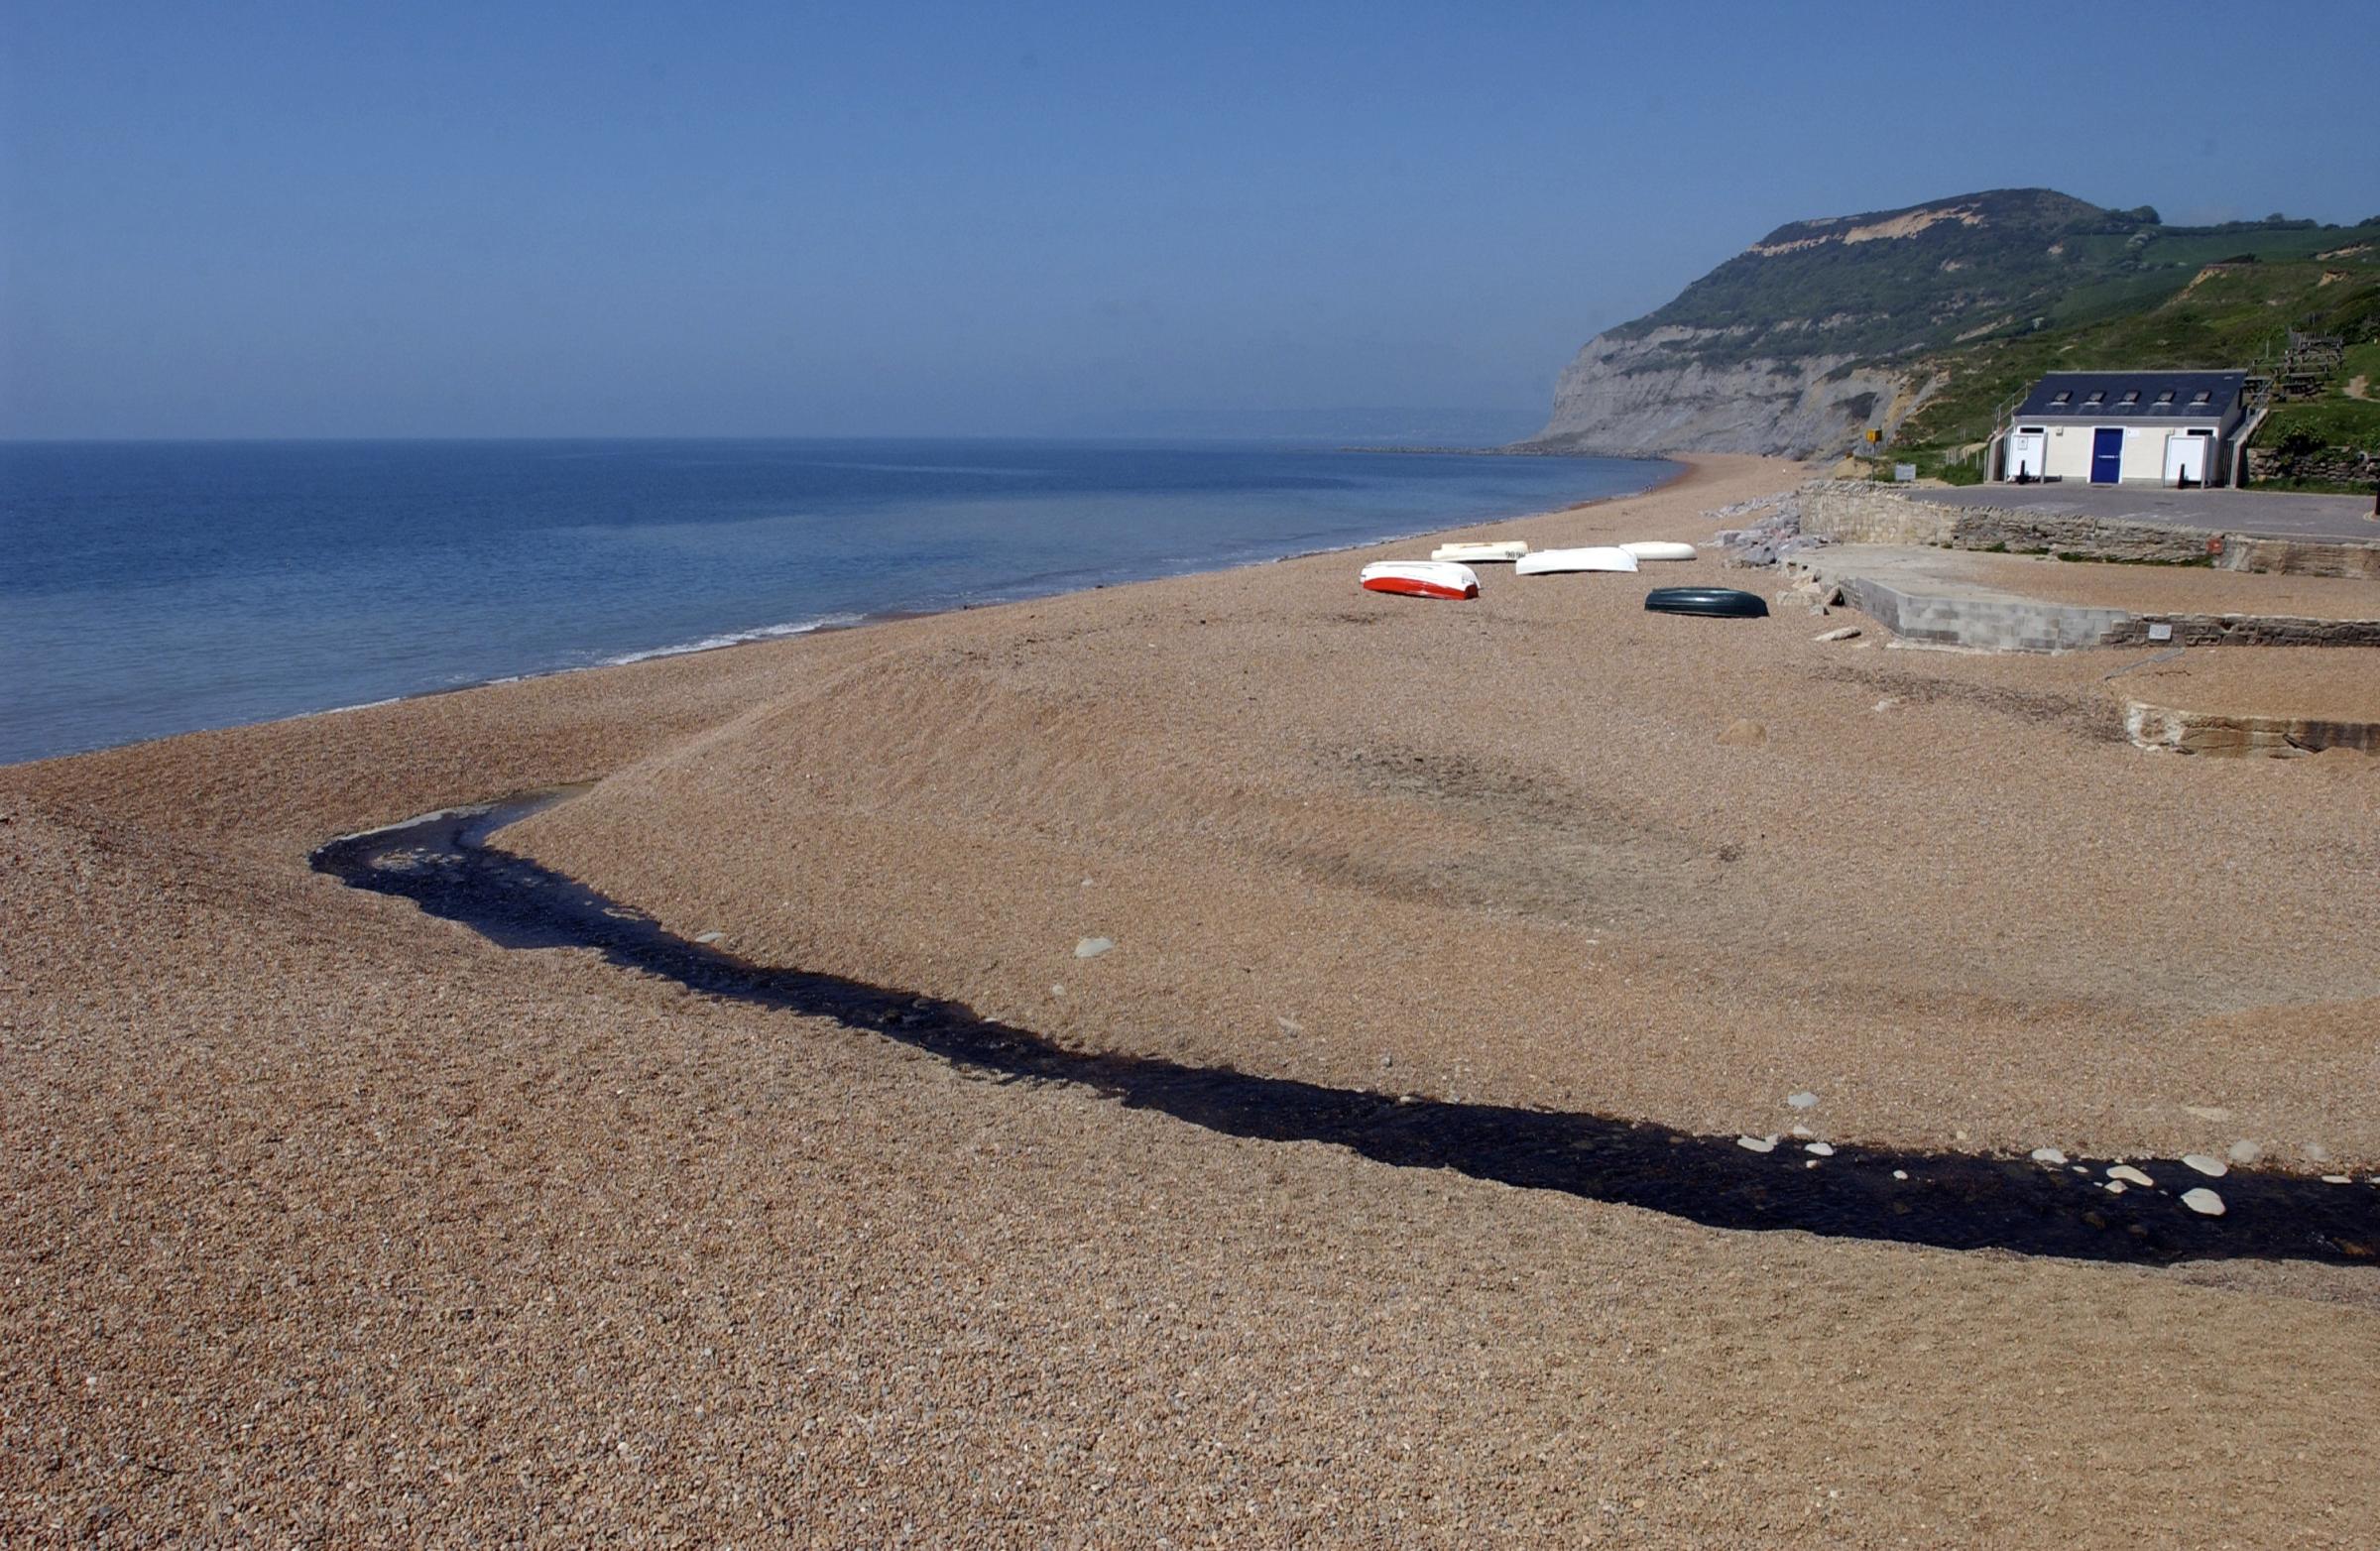 10-year-old girl rescued after getting into trouble in the sea – Bridport and Lyme Regis News